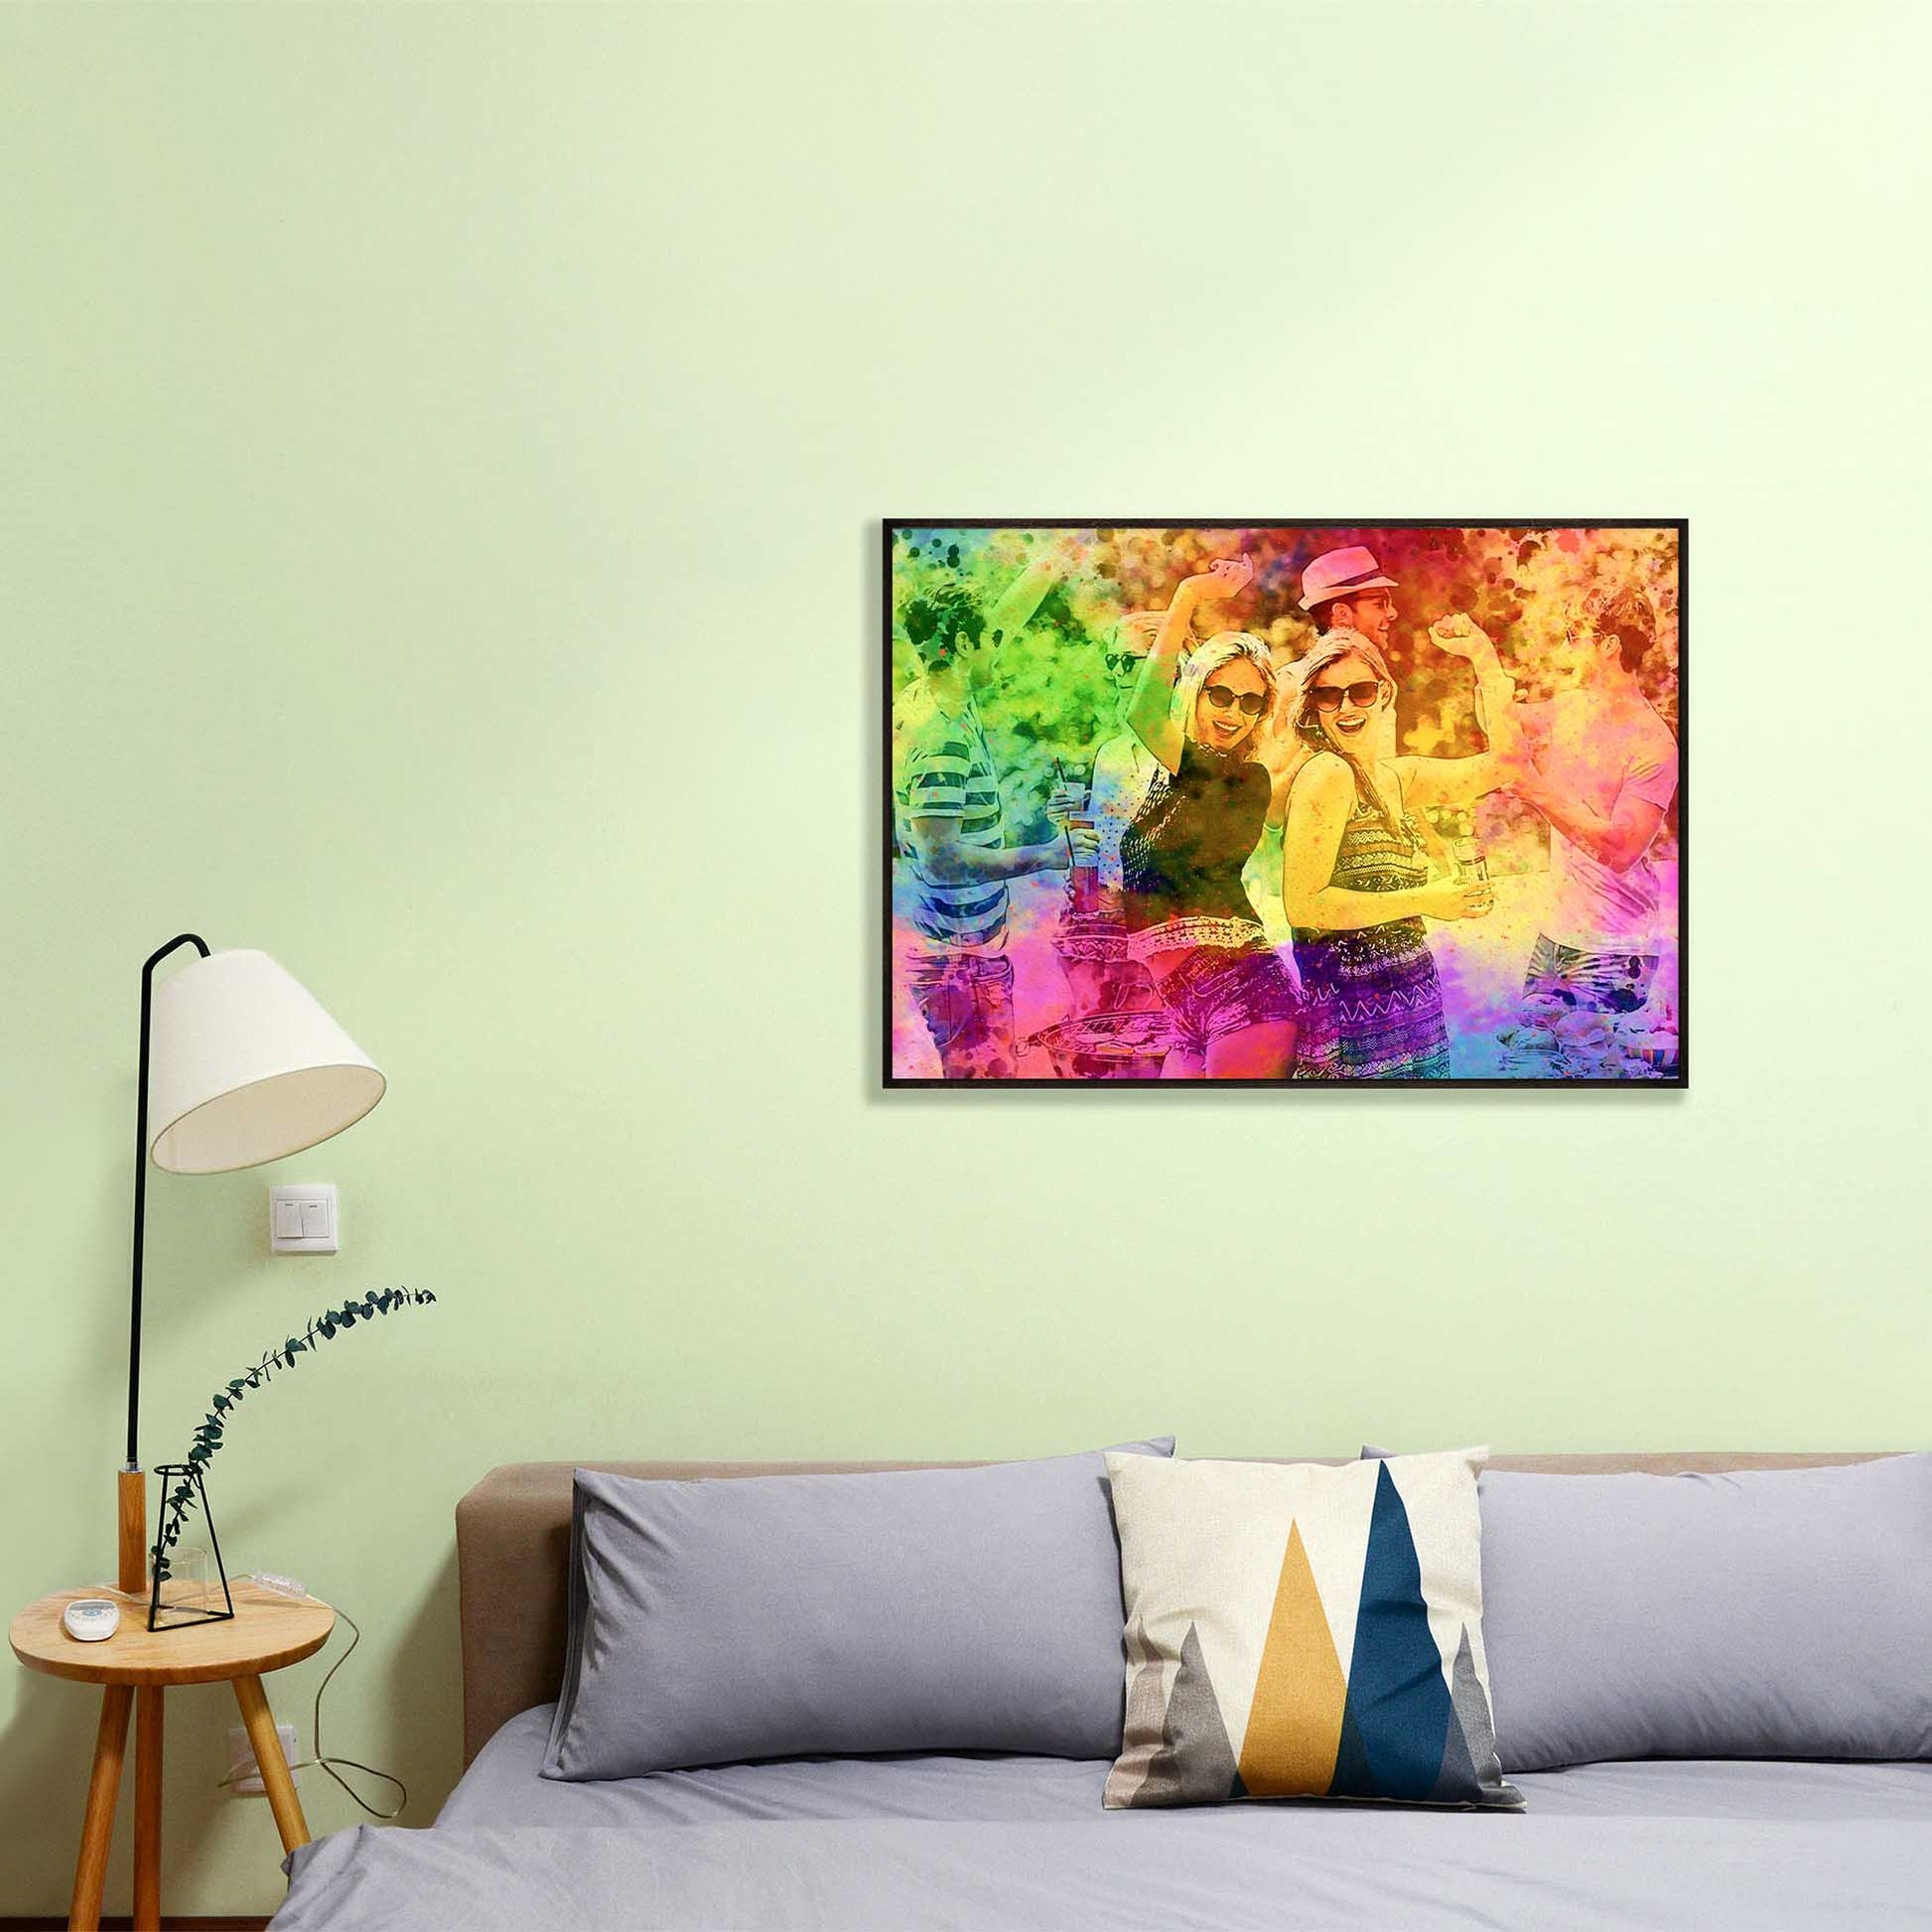 The Personalised Splash of Colours Framed Print is a true celebration of creativity and joy. Its vibrant and bright colors evoke a sense of happiness, making it a delightful gift for any occasion, gallery-quality paper print